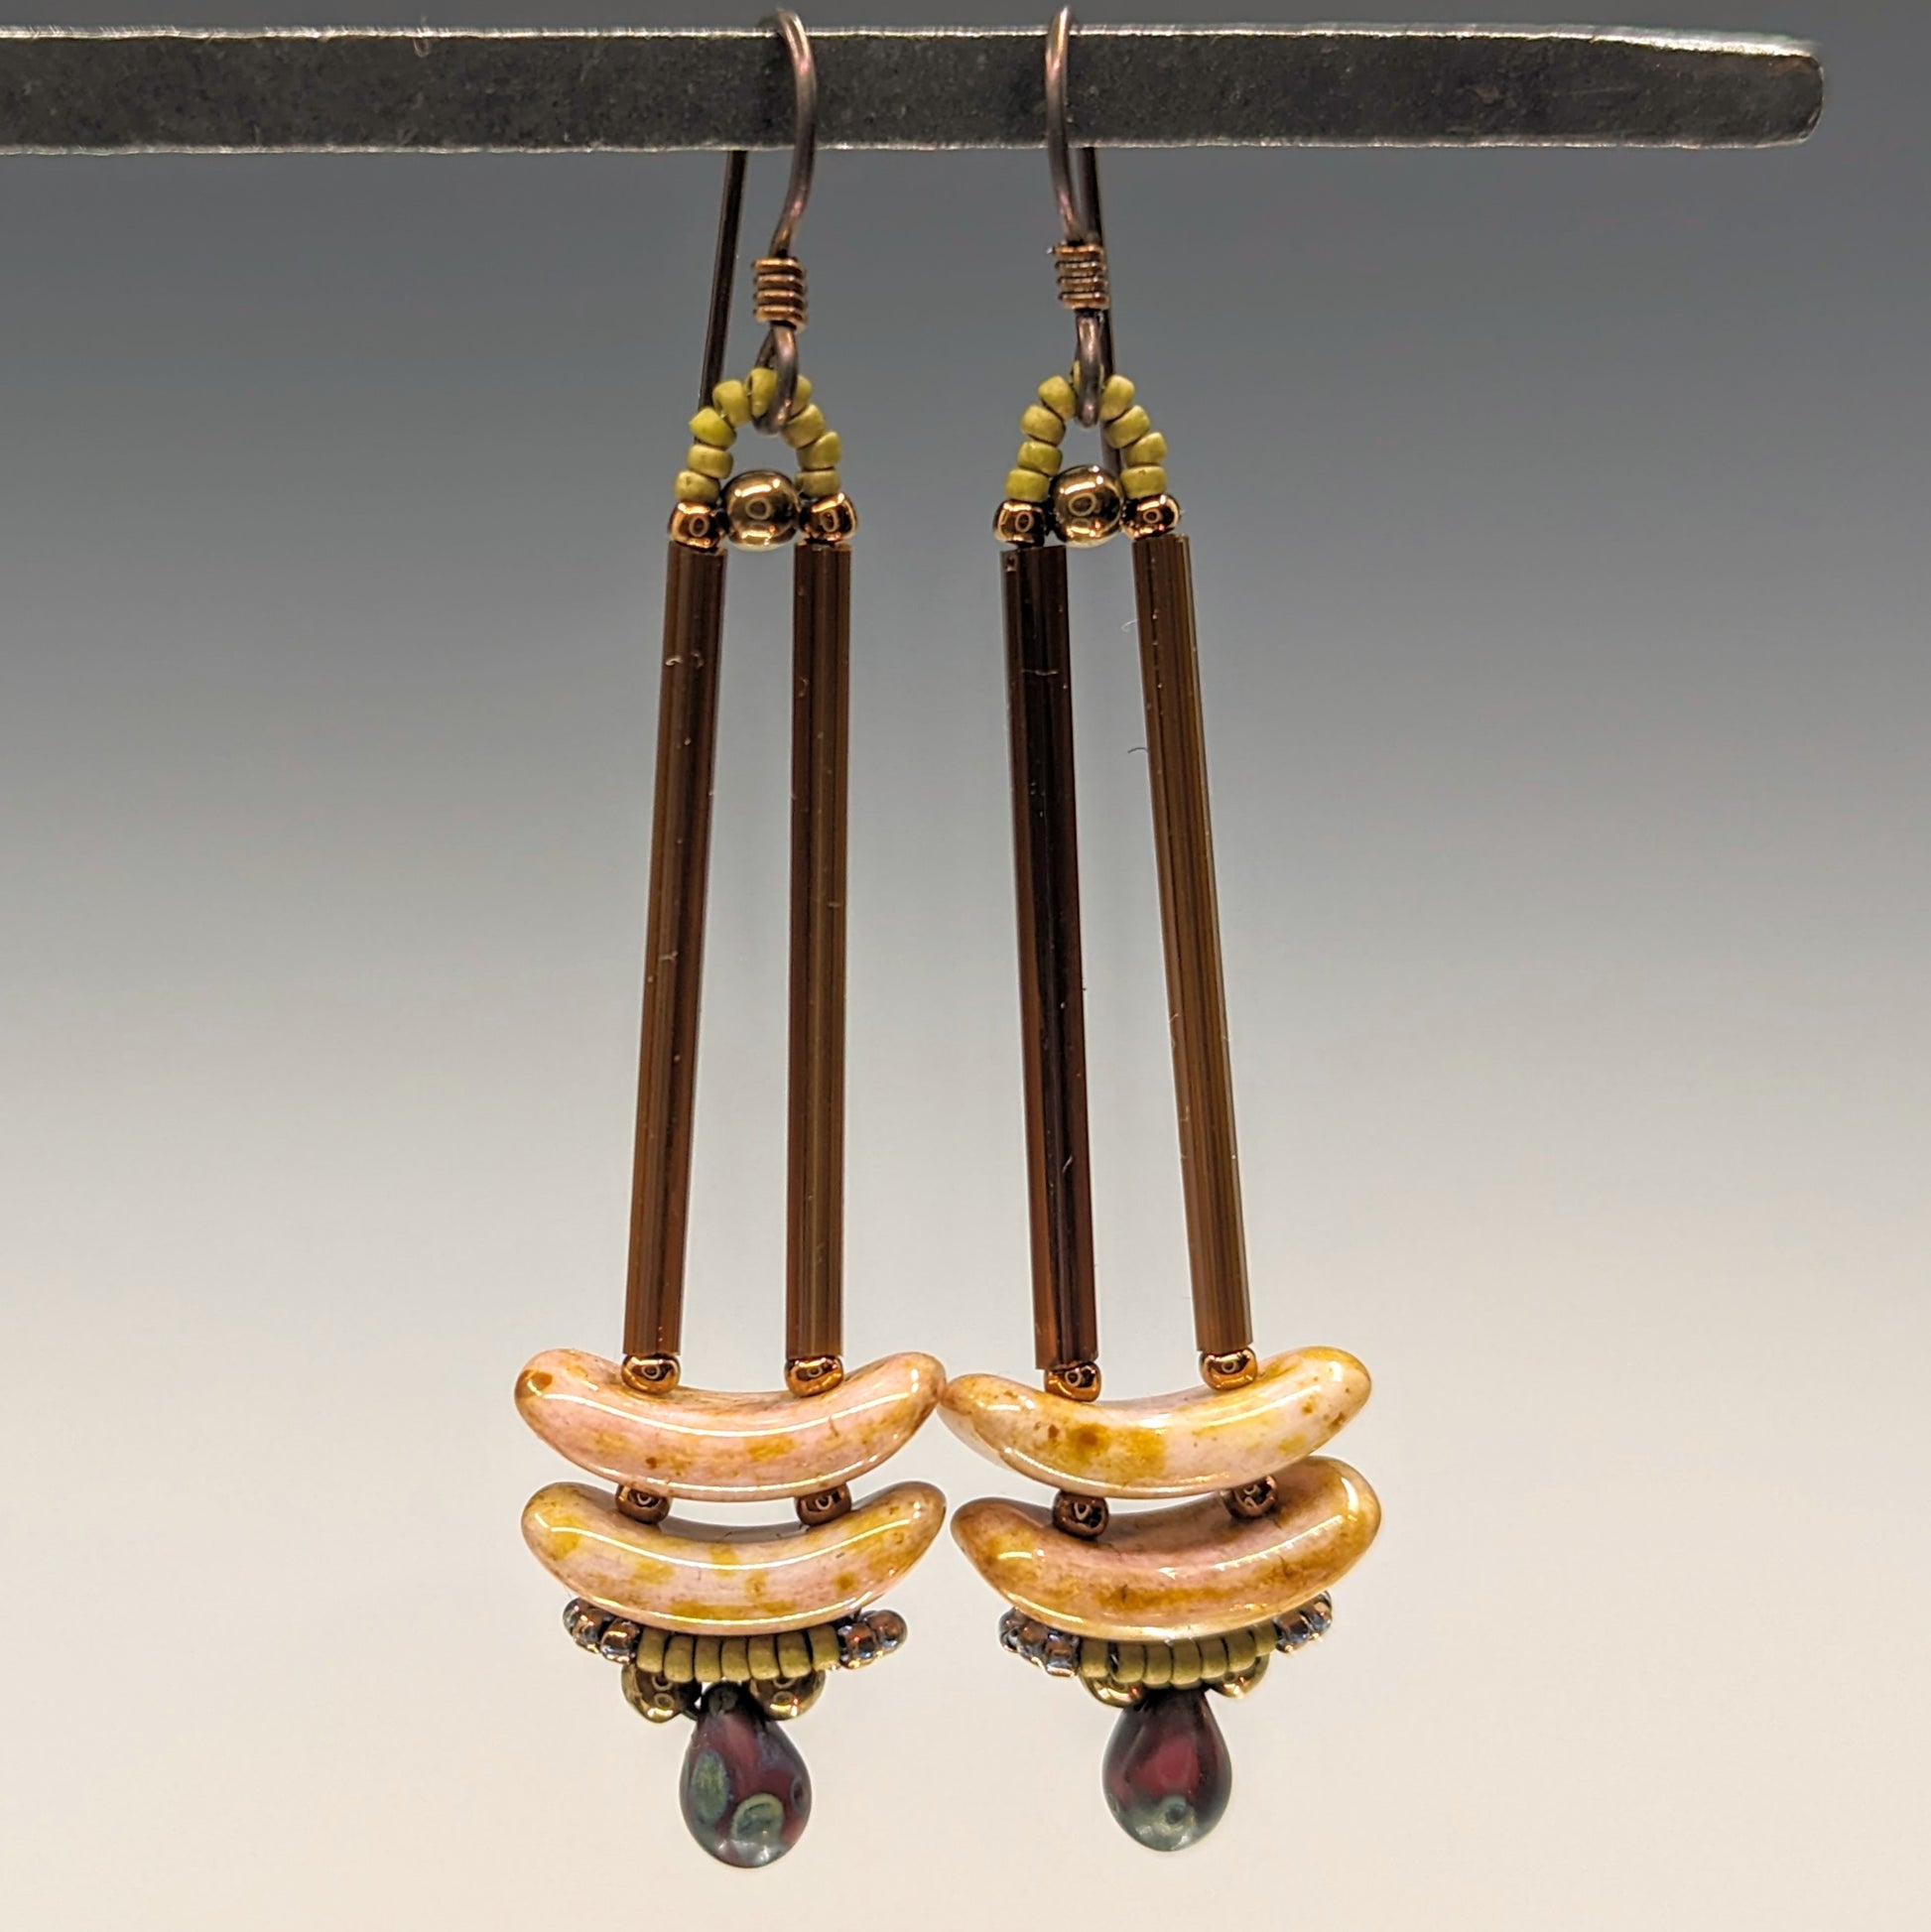 Earrings that look similar to a medicine dropper hang from  a black bar. There are two long, brown beads forming narrow vertical columns ending at the top of two speckled pink stacked arc shaped beads. At the bottom is a speckled red drop shaped bead, surrounded by a belt of gold seed beads.